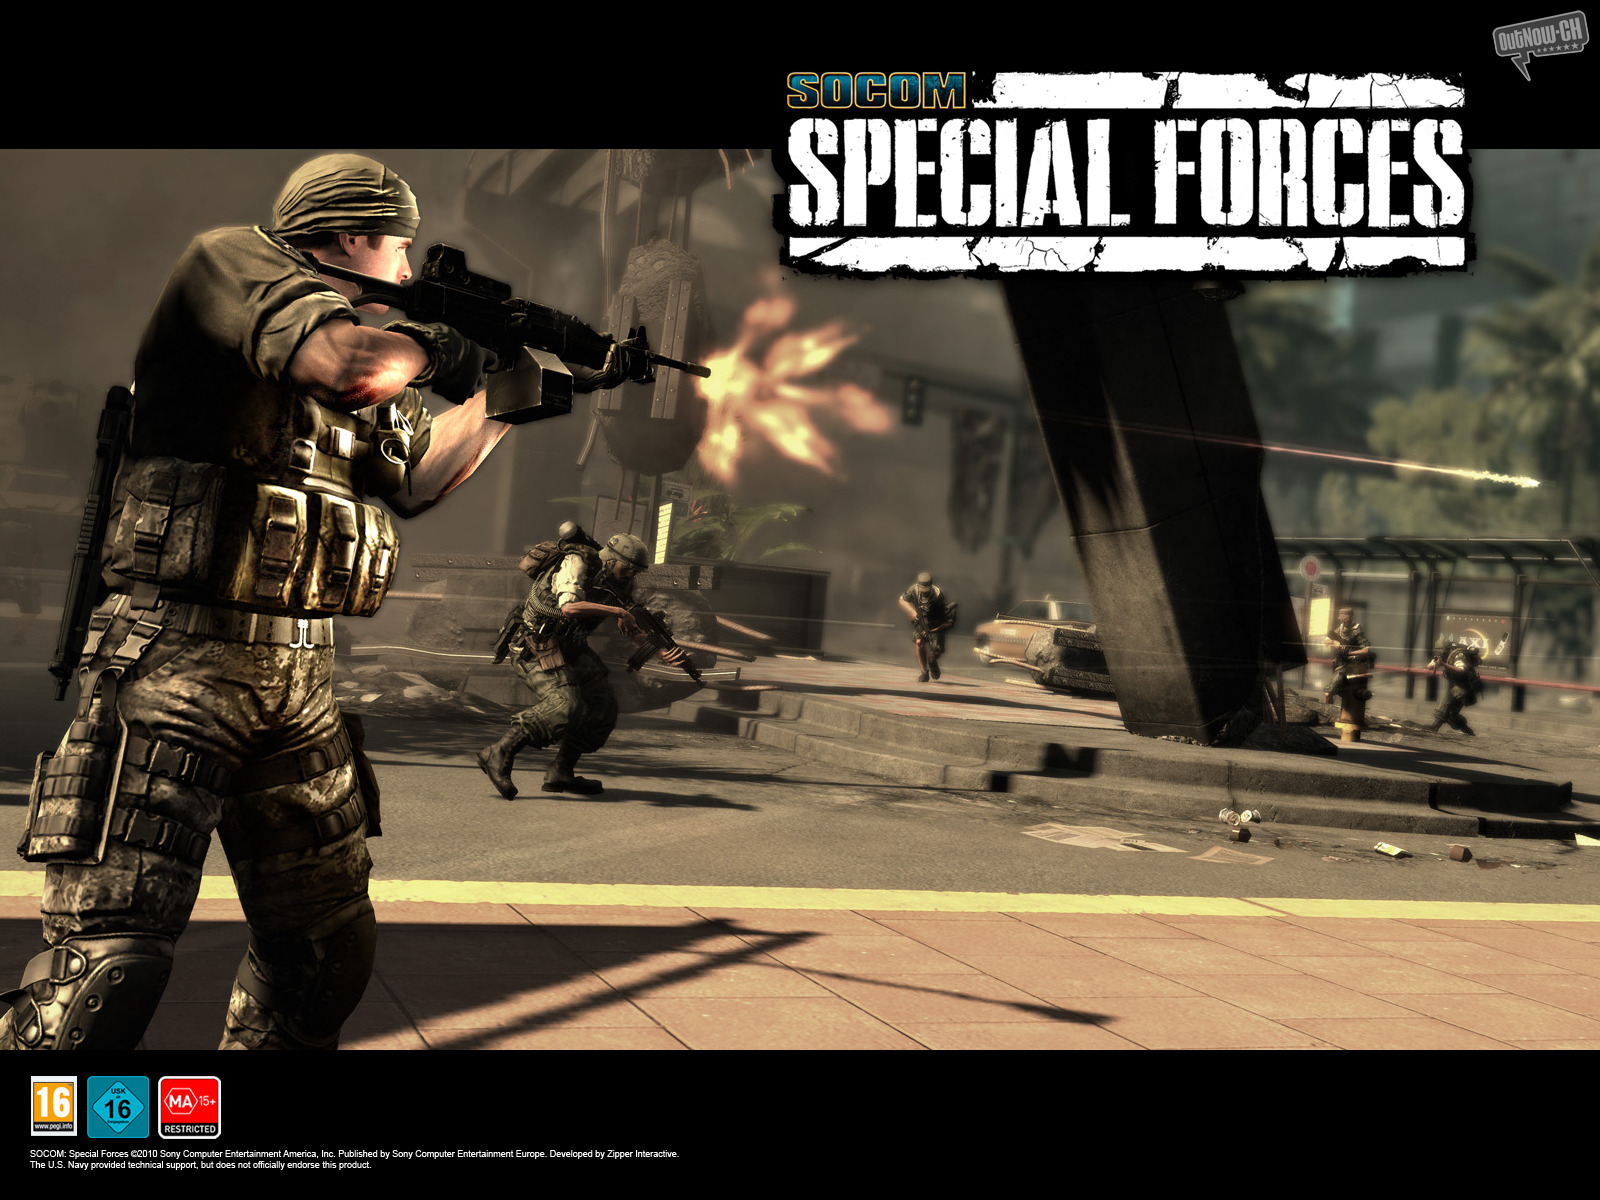 video game, socom: special forces, game, gun, socom, soldier, special forces